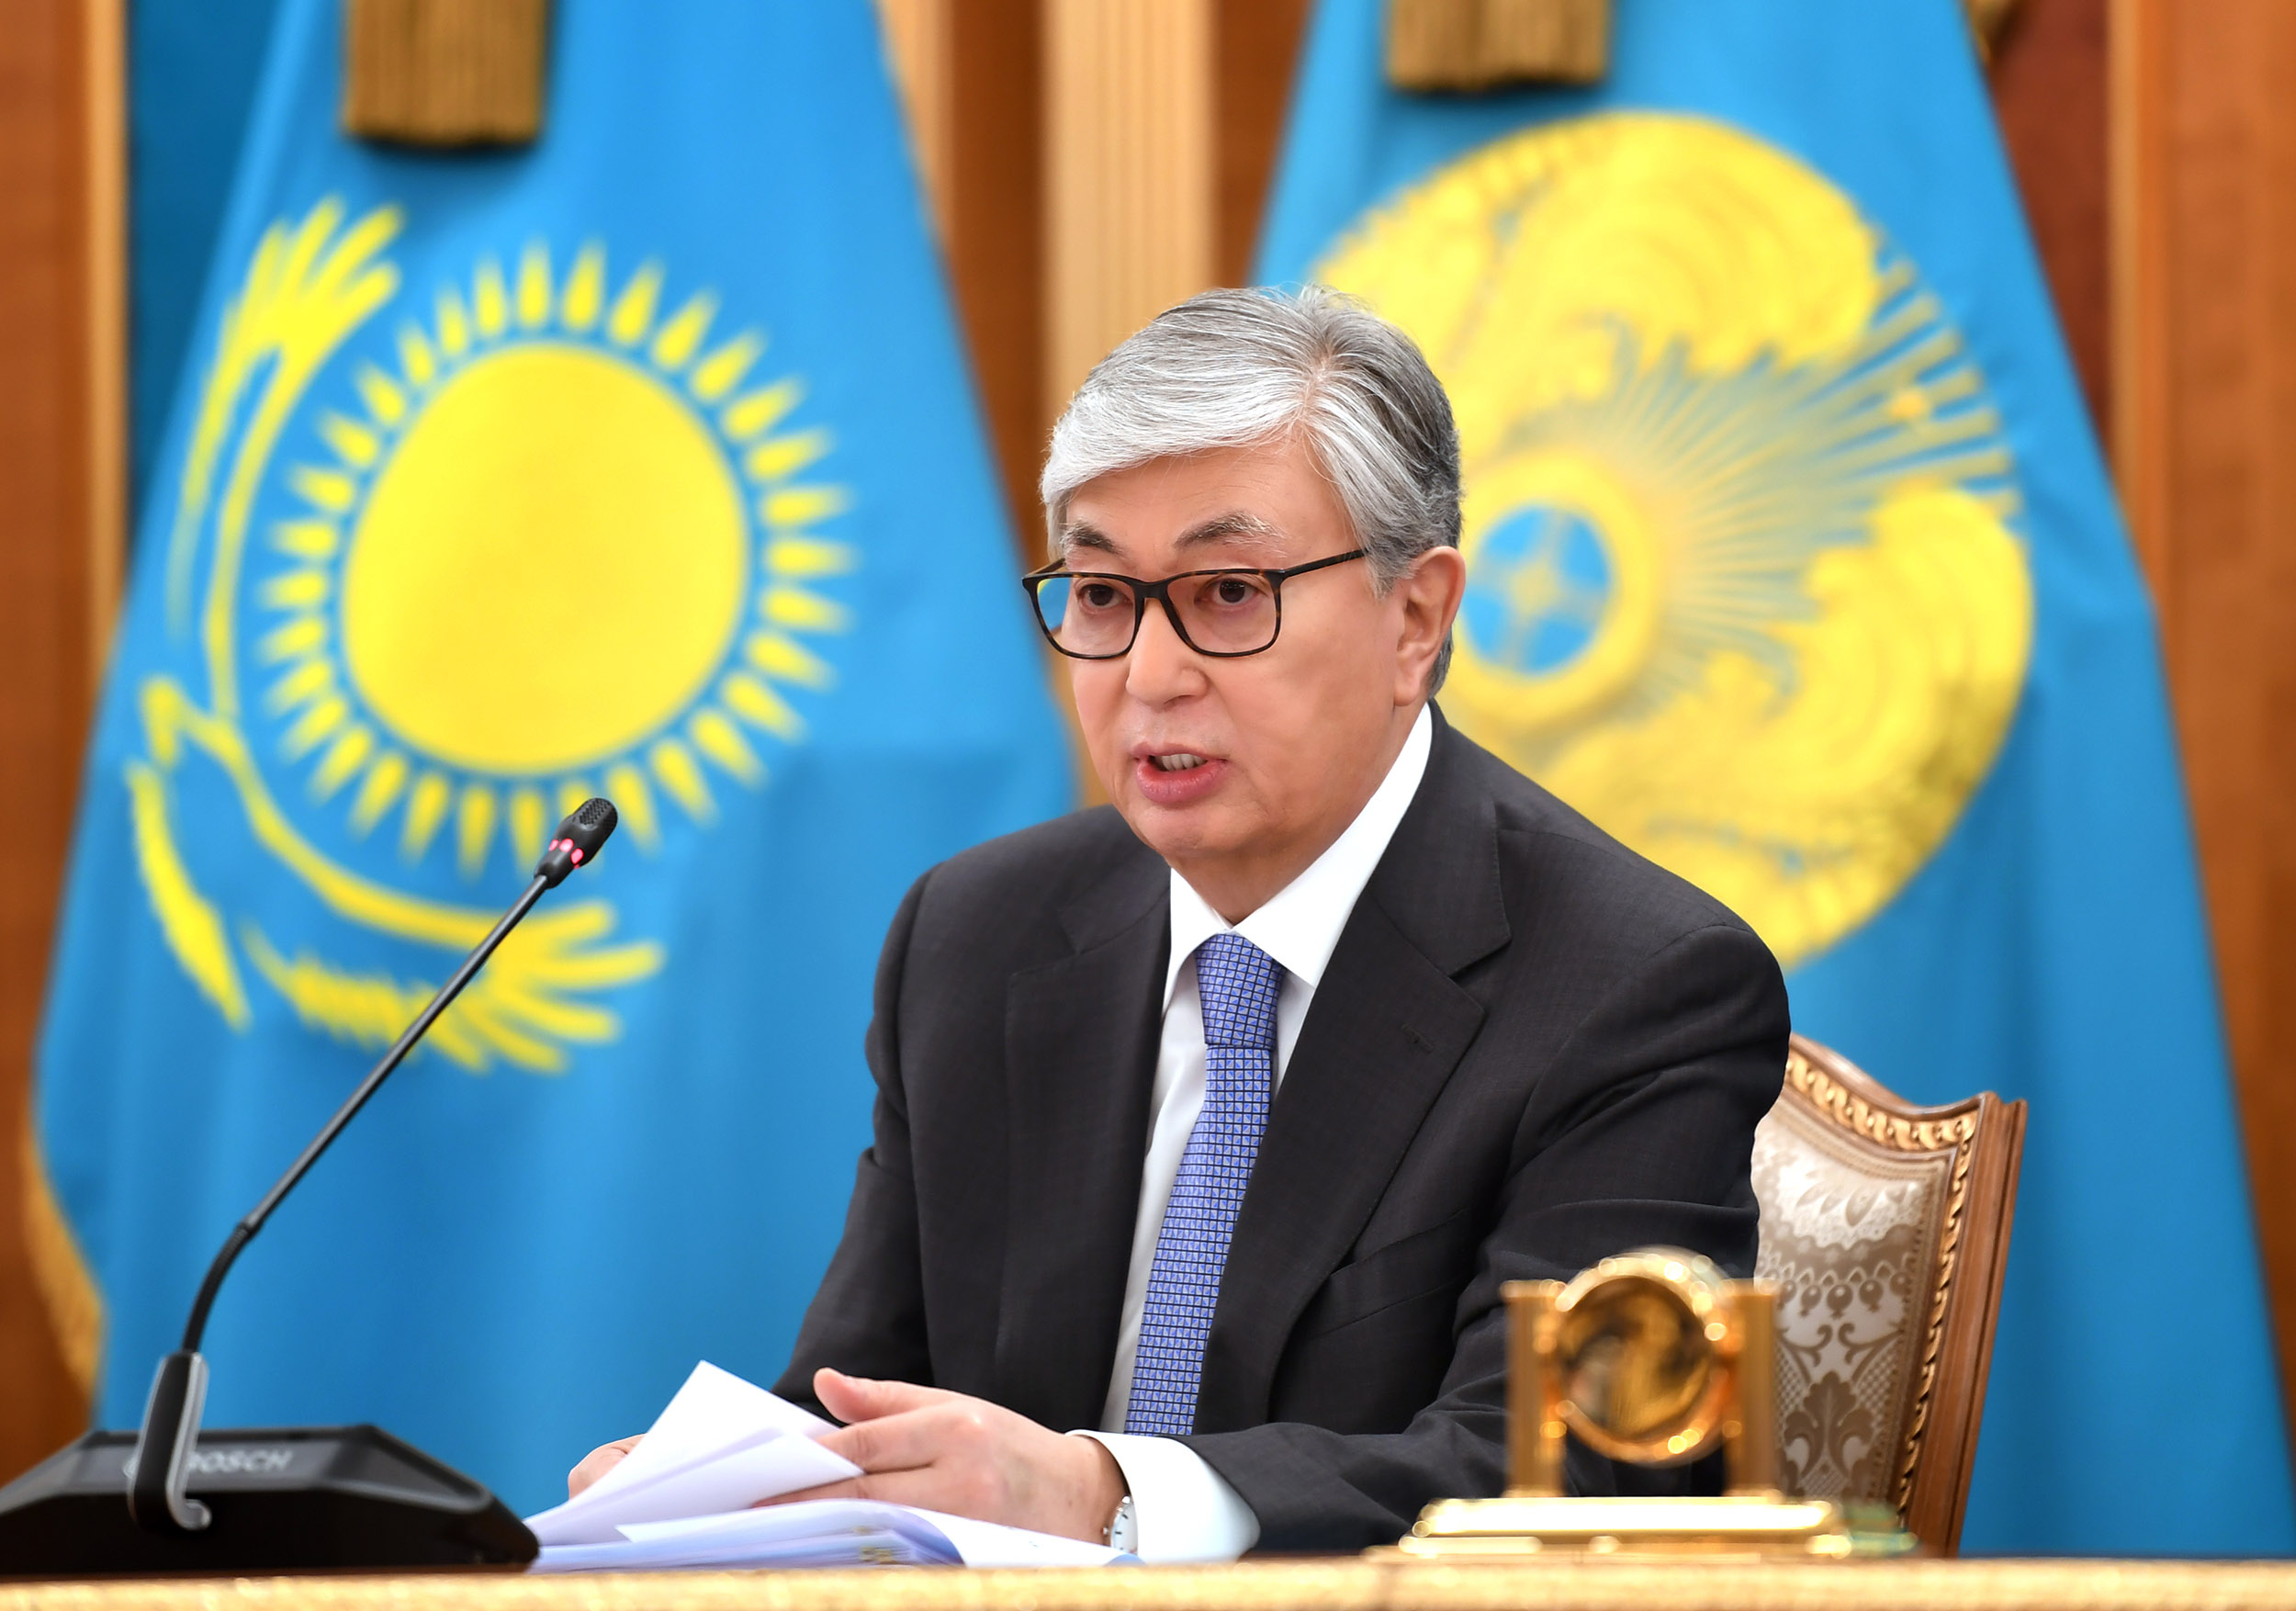 Kassym-Jomart Tokayev held a meeting of the Council of National Investors